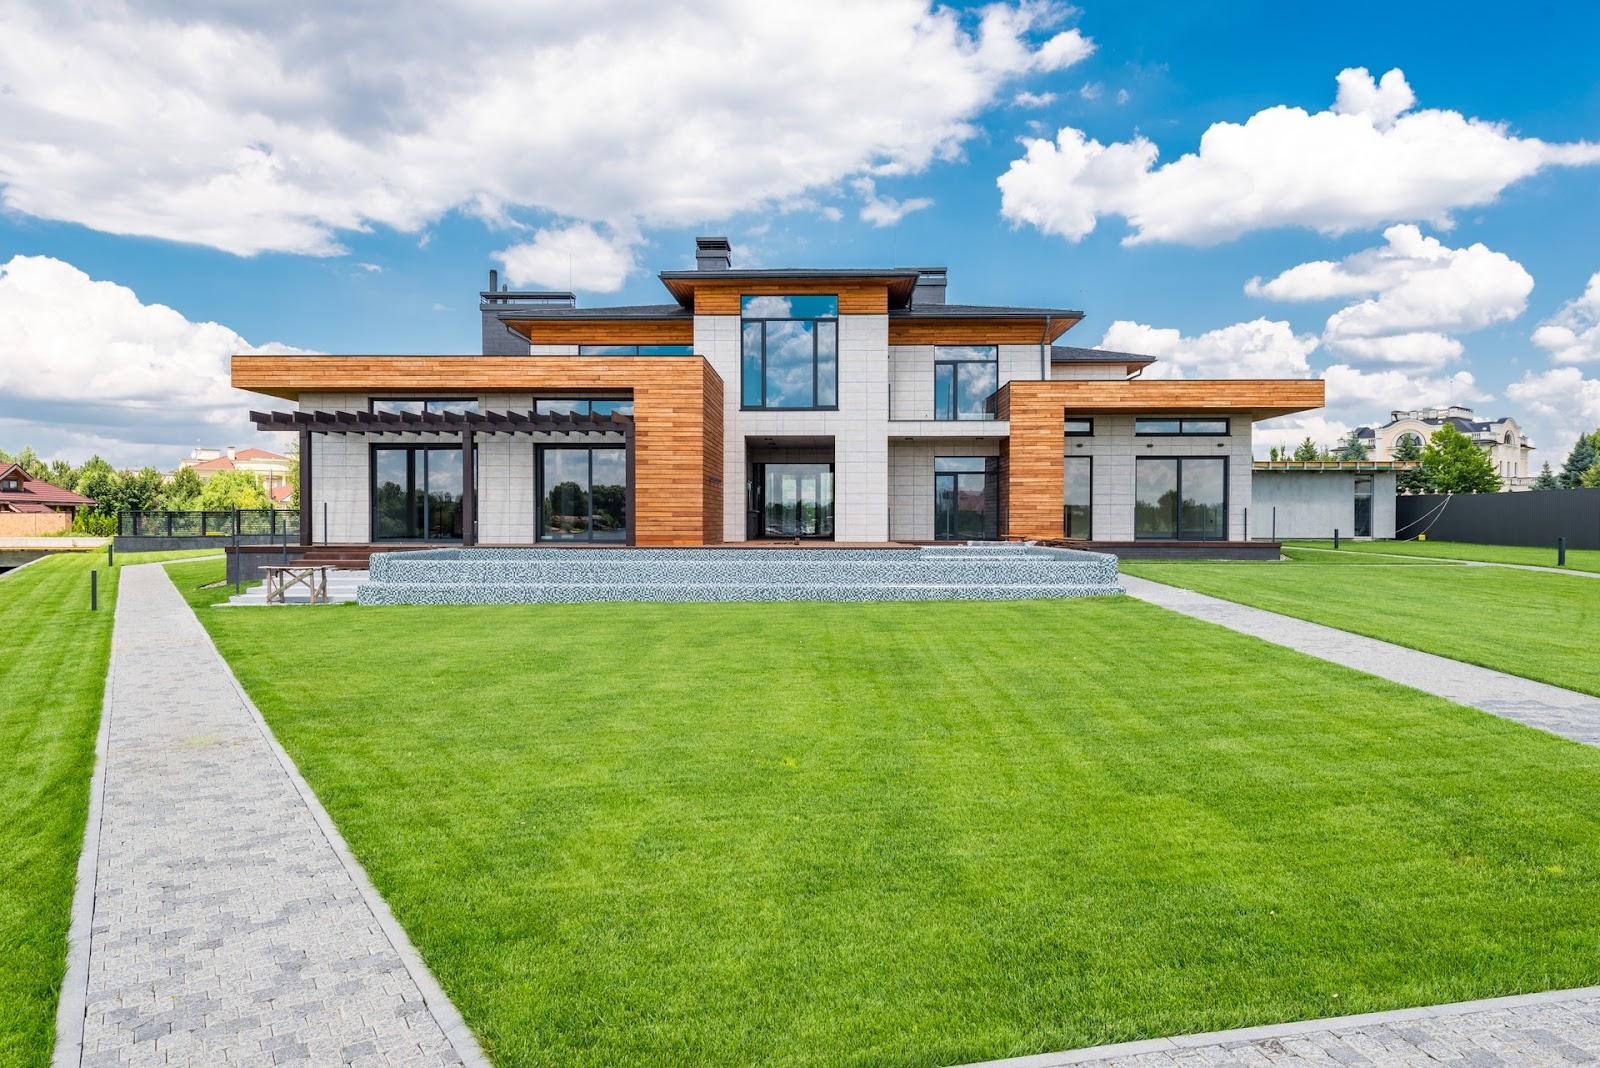 There's an increasingly high demand for luxurious houses in the US